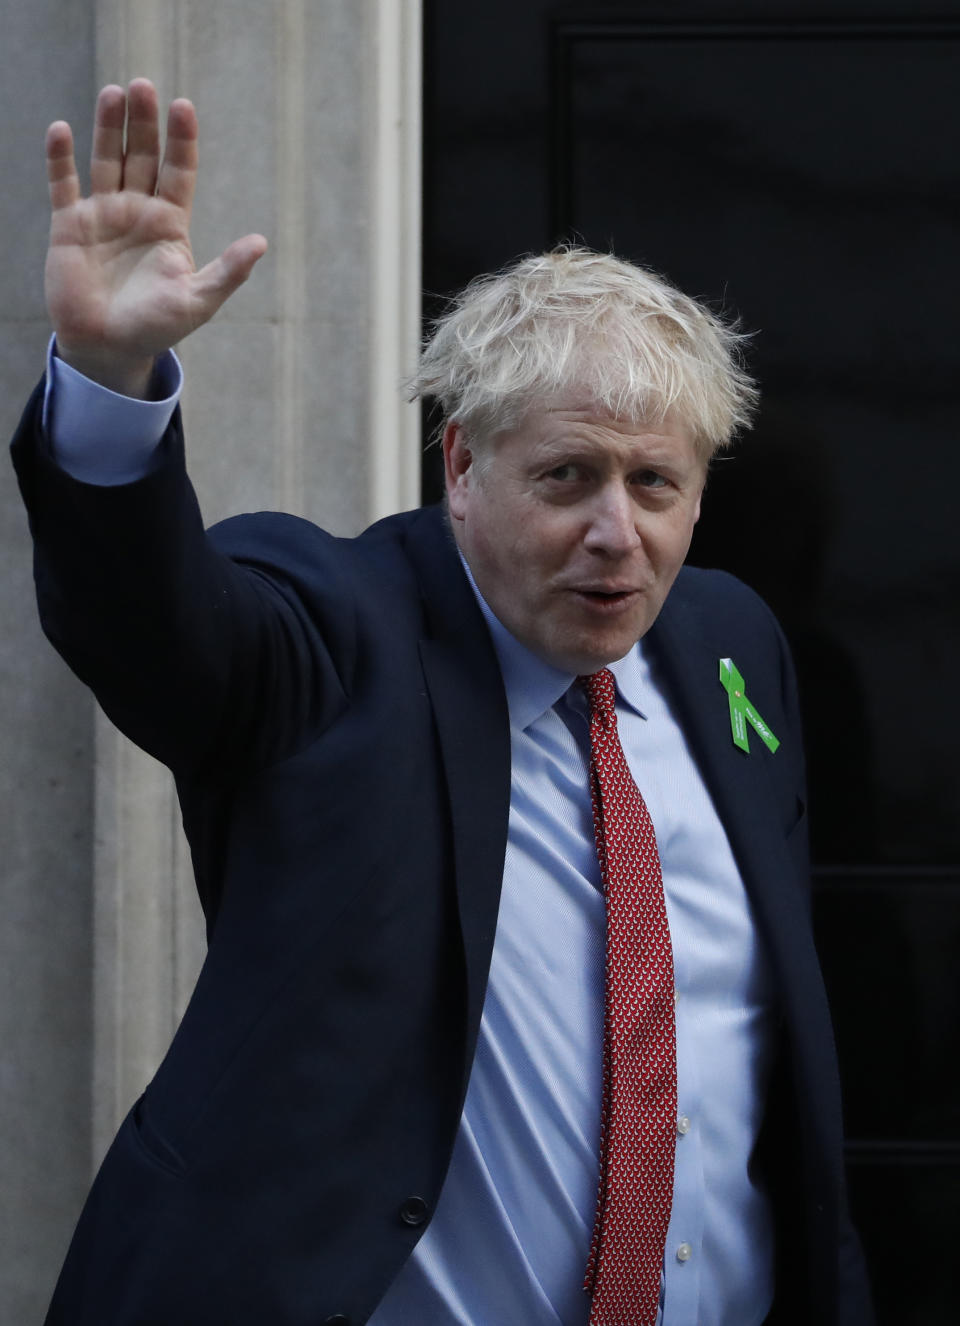 Britain's Prime Minister Boris Johnson waves to the media from the doorstep of 10 Downing Street in London, Thursday, Oct. 10, 2019, ahead of meeting mental health campaigners. (AP Photo/Alastair Grant)